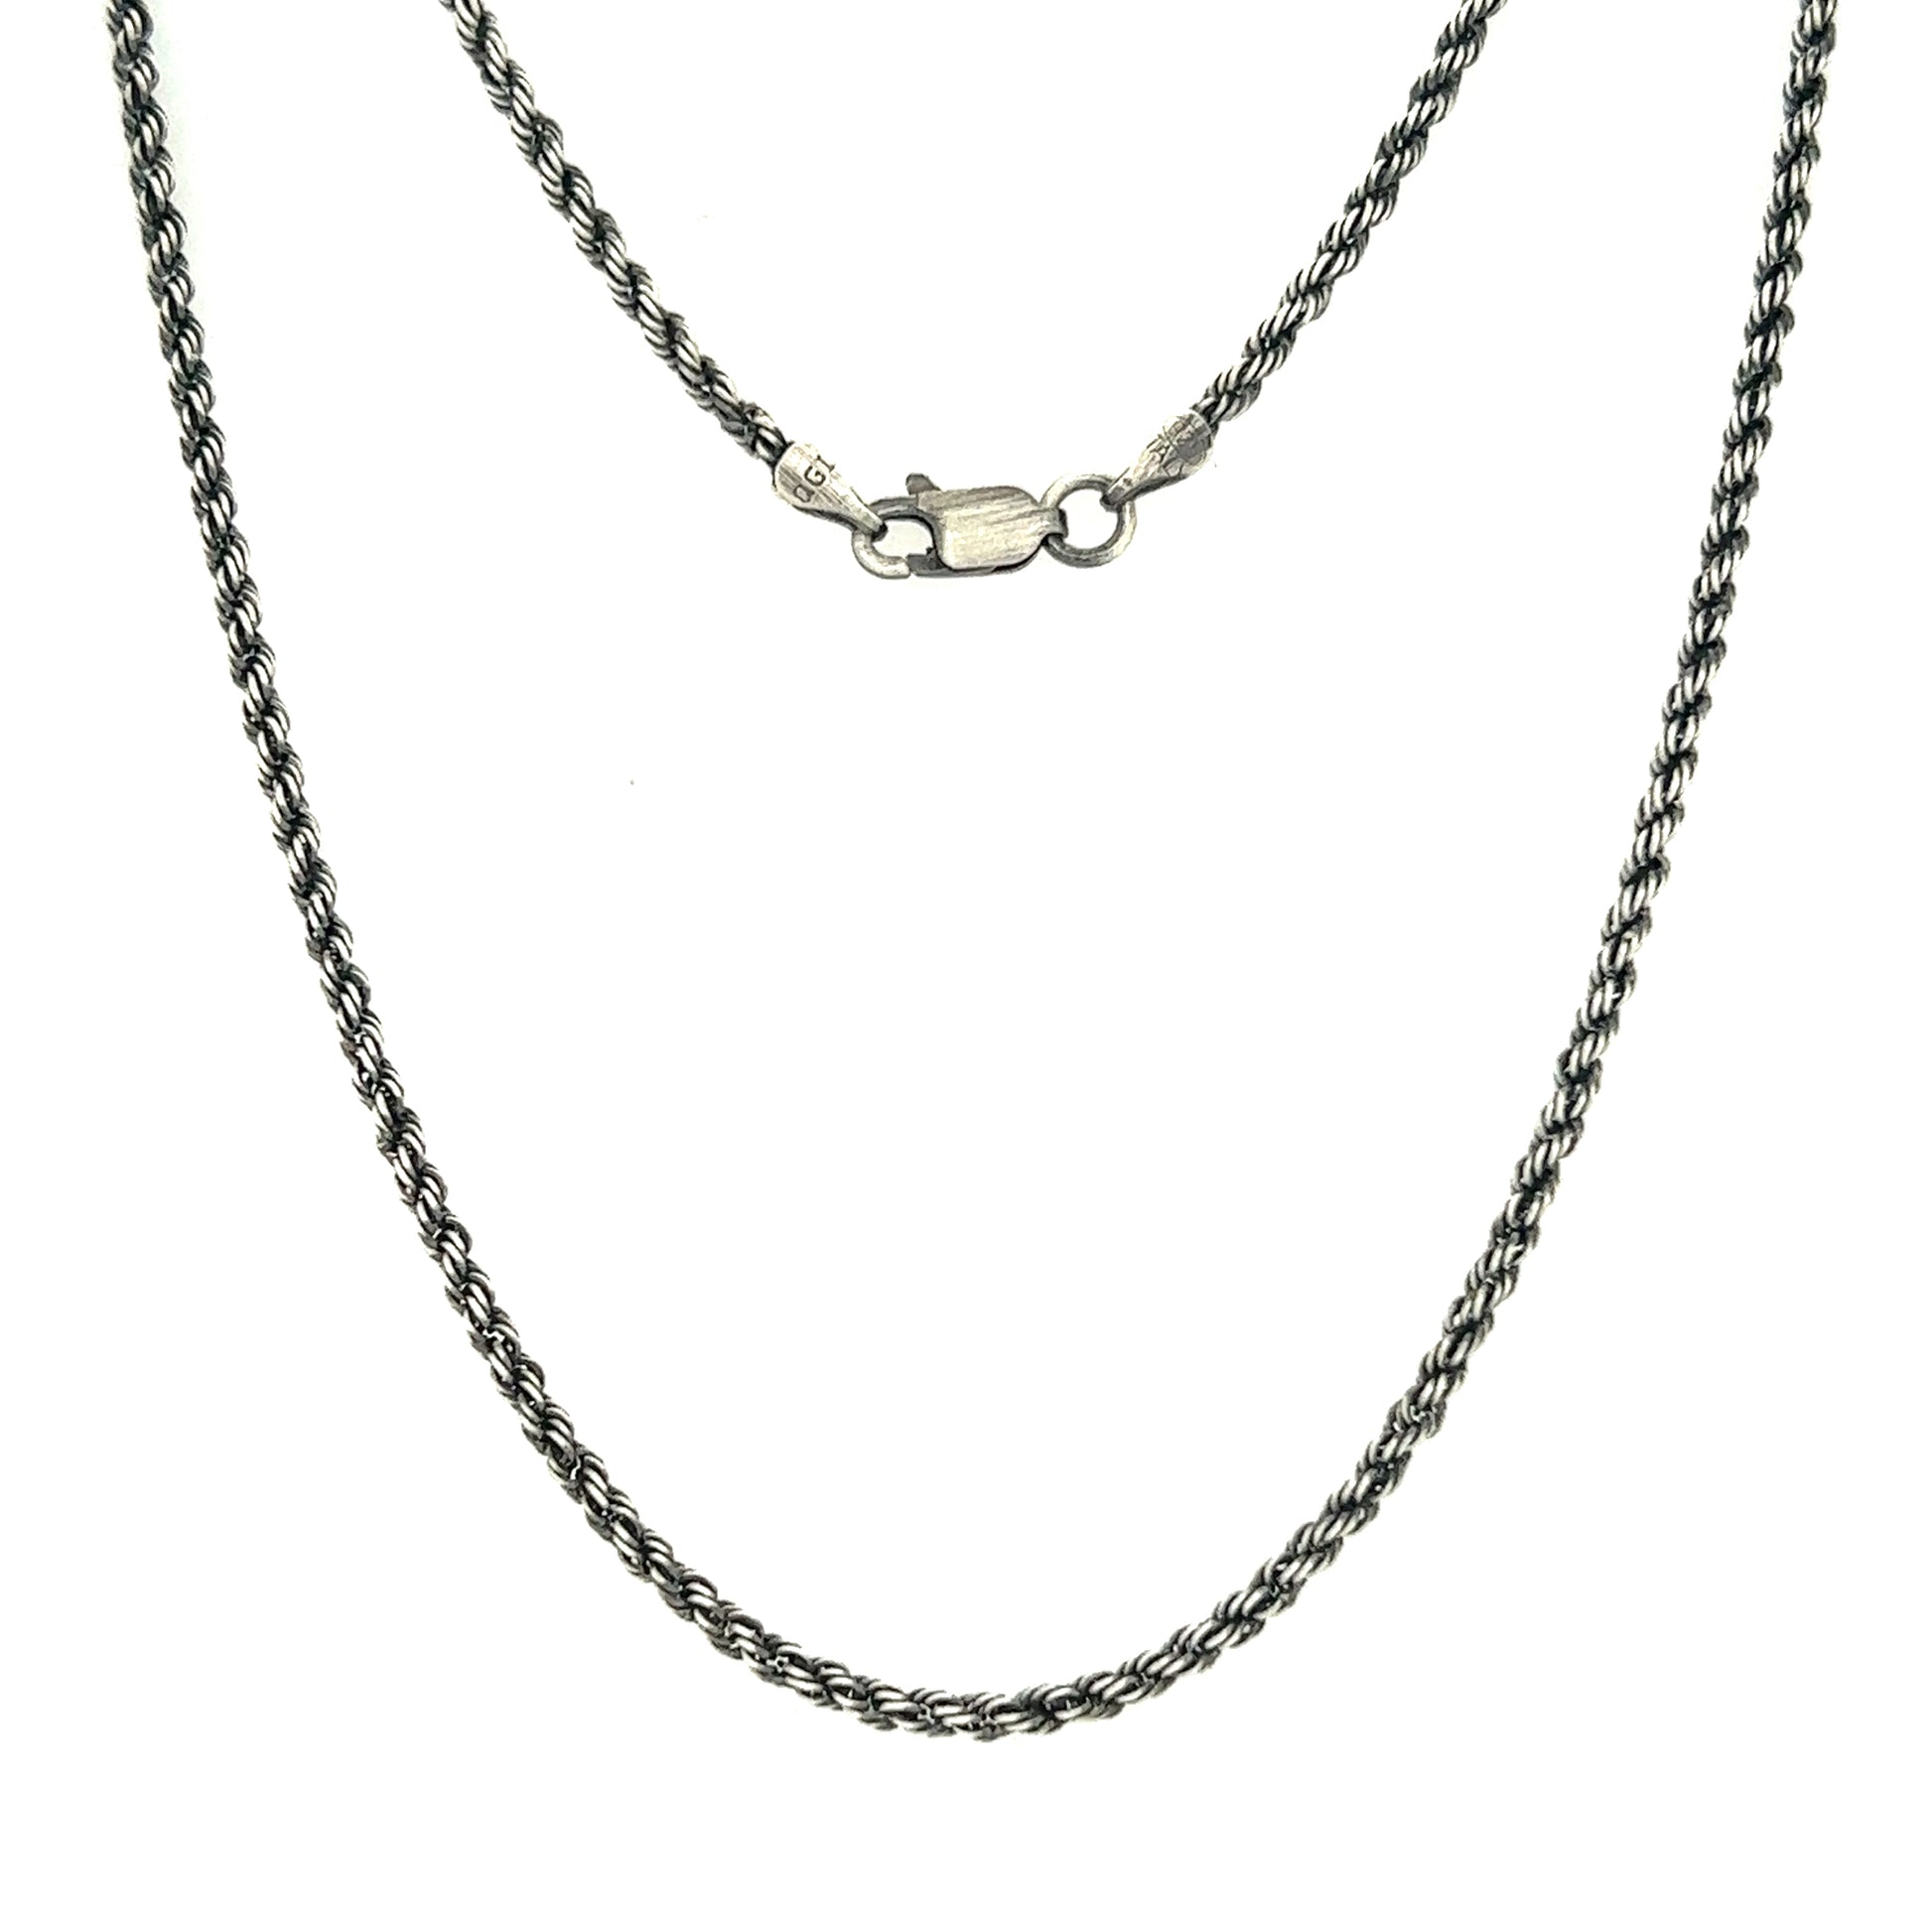 Rope Chain 2.3mm with Ruthenium-plated Finish in Sterling Silver Full Chain View